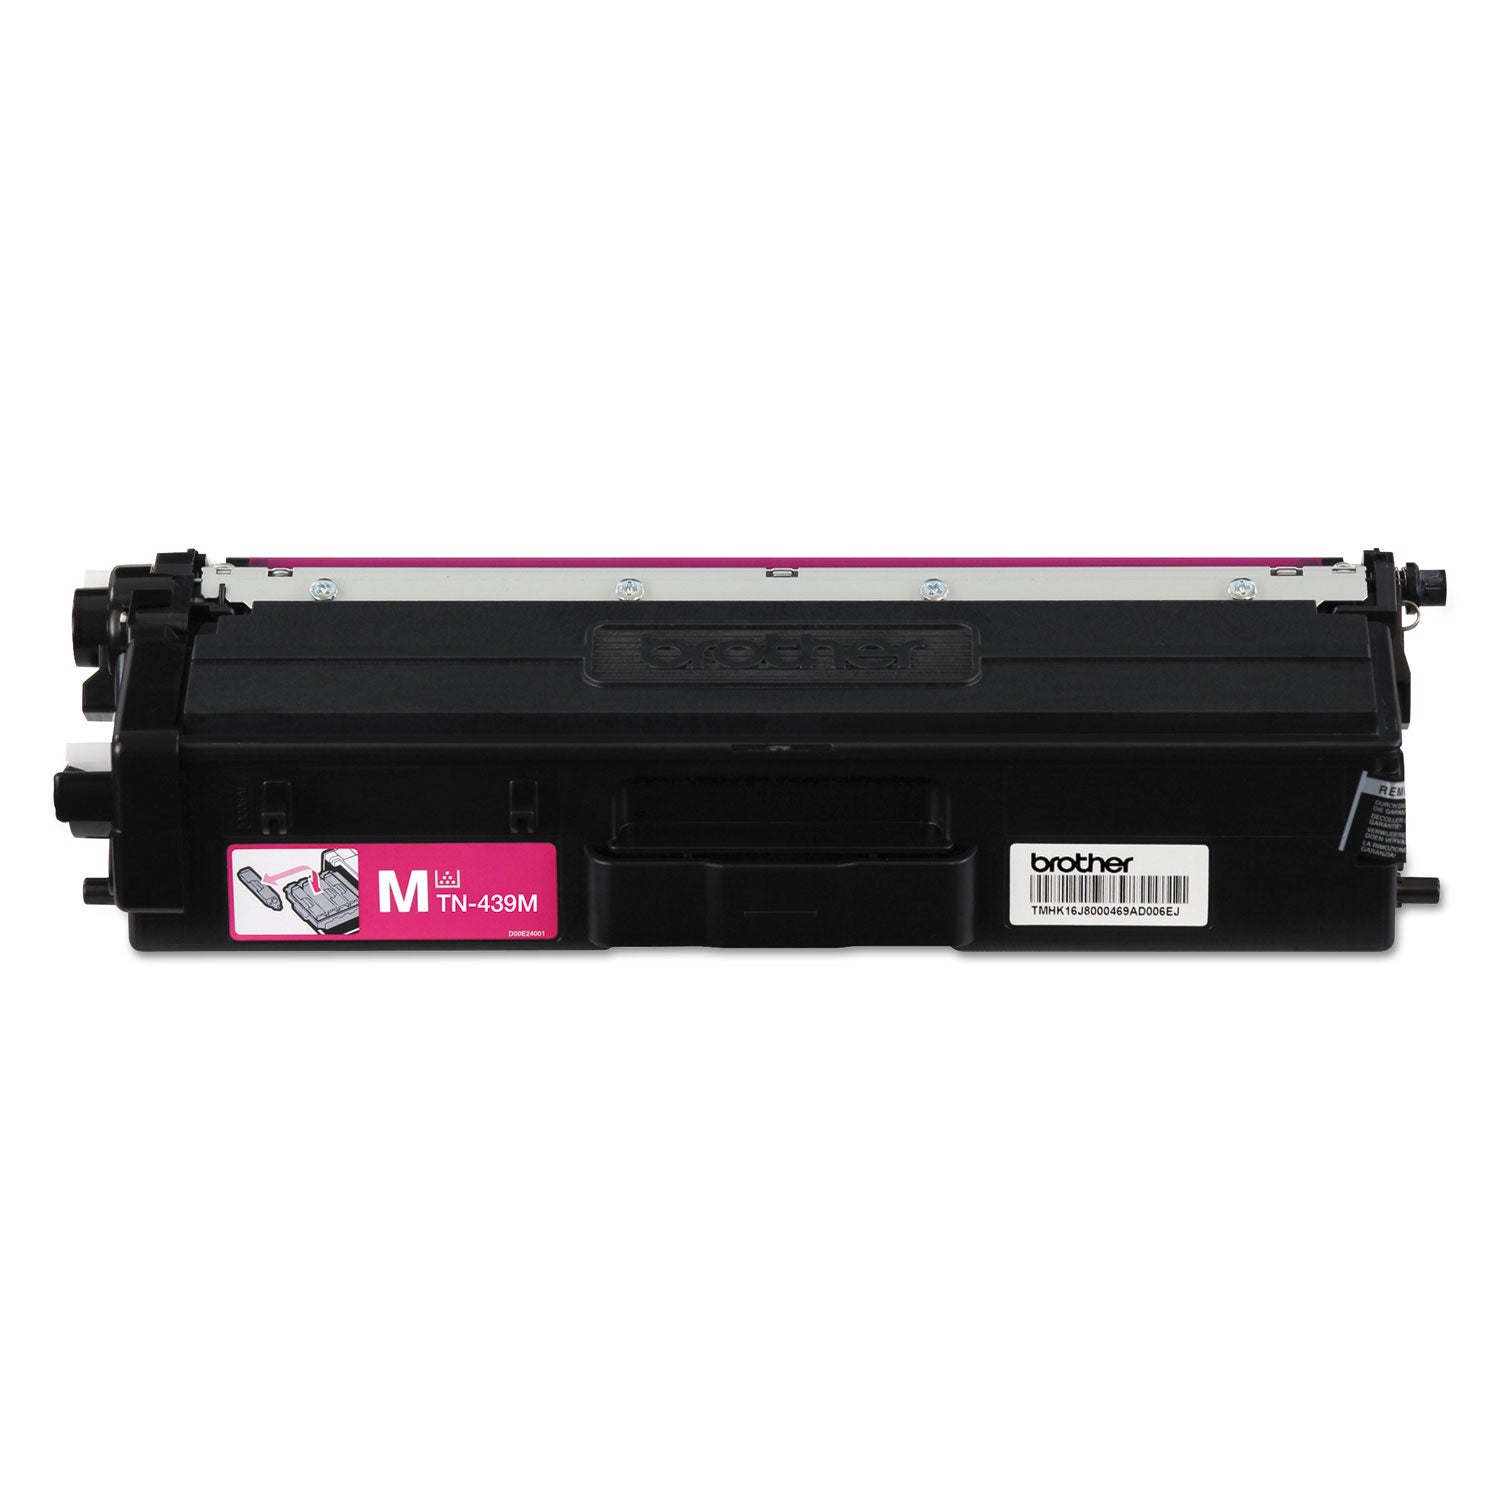 Brother TN439M Original Ultra High Yield Laser Toner Cartridge - Magenta - 1 Each - 9000 Pages - 2